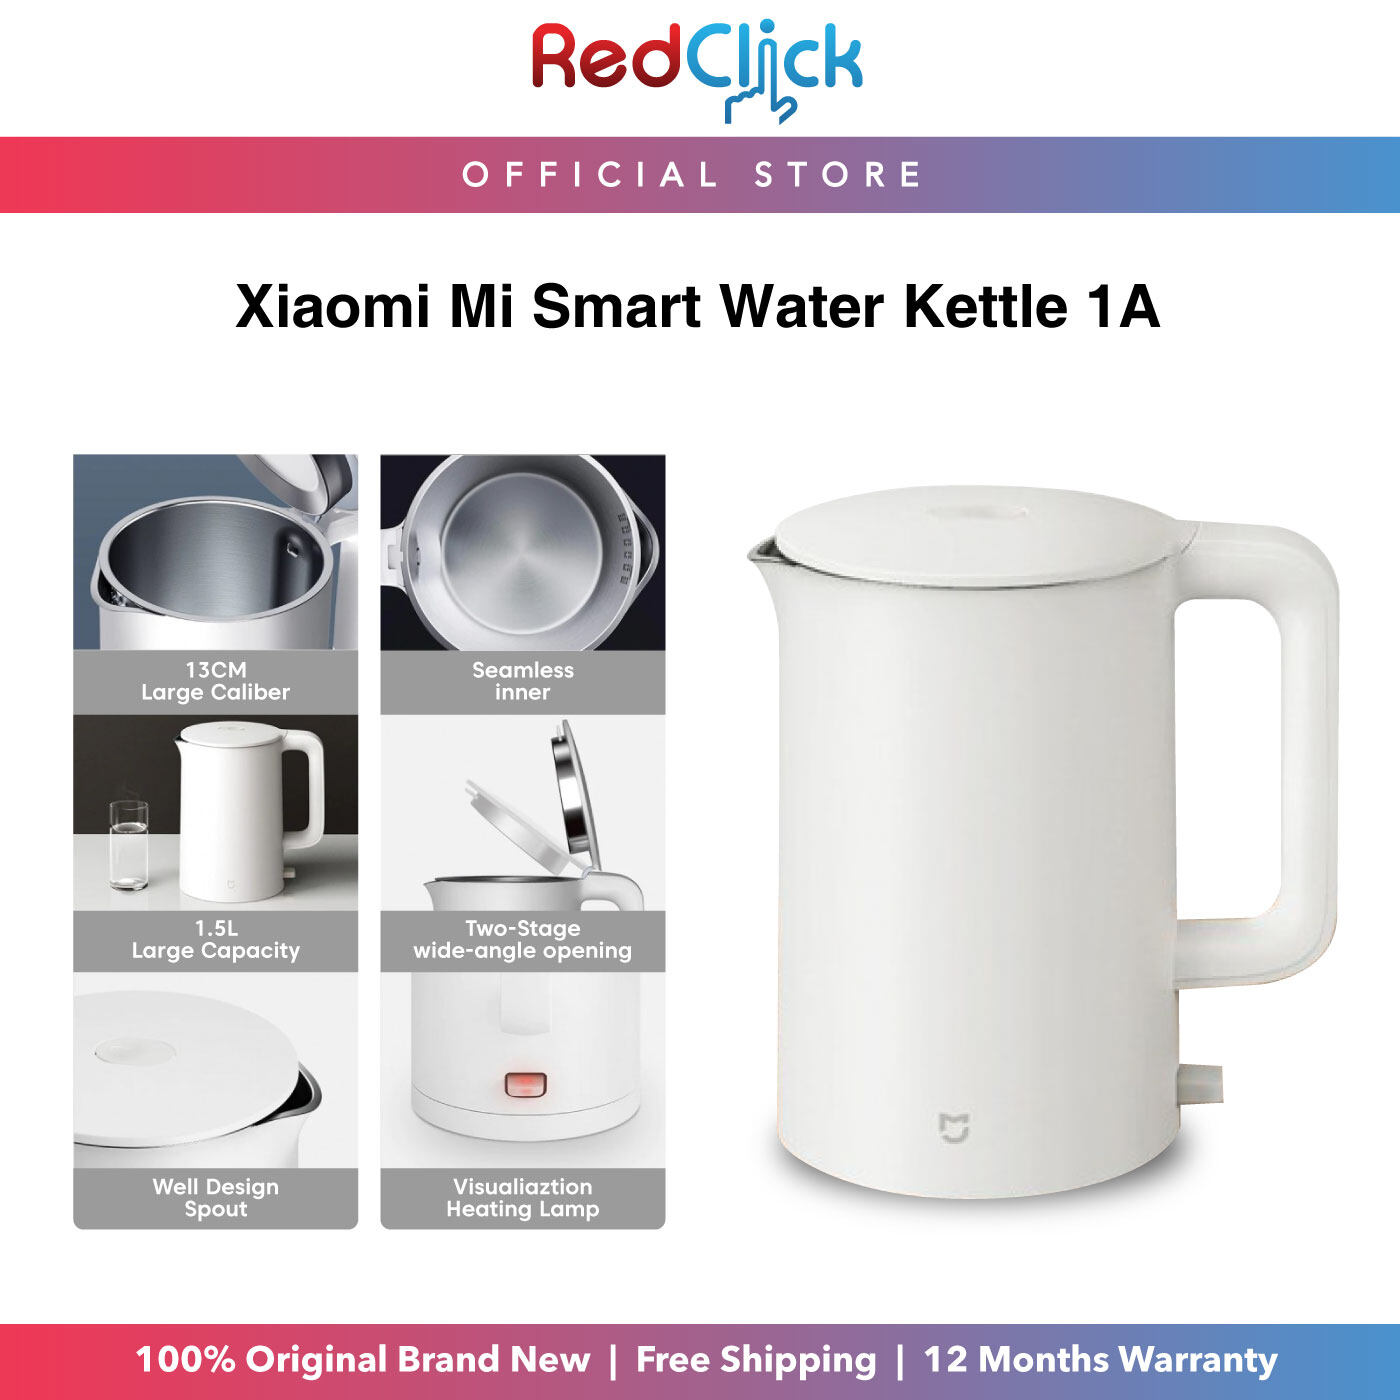 Xiaomi Mijia Smart Water Kettle 1A 1.5L Large Capacity 1800W Rapid Heating Double-Layer Scald Protection Original Xiaomi Product